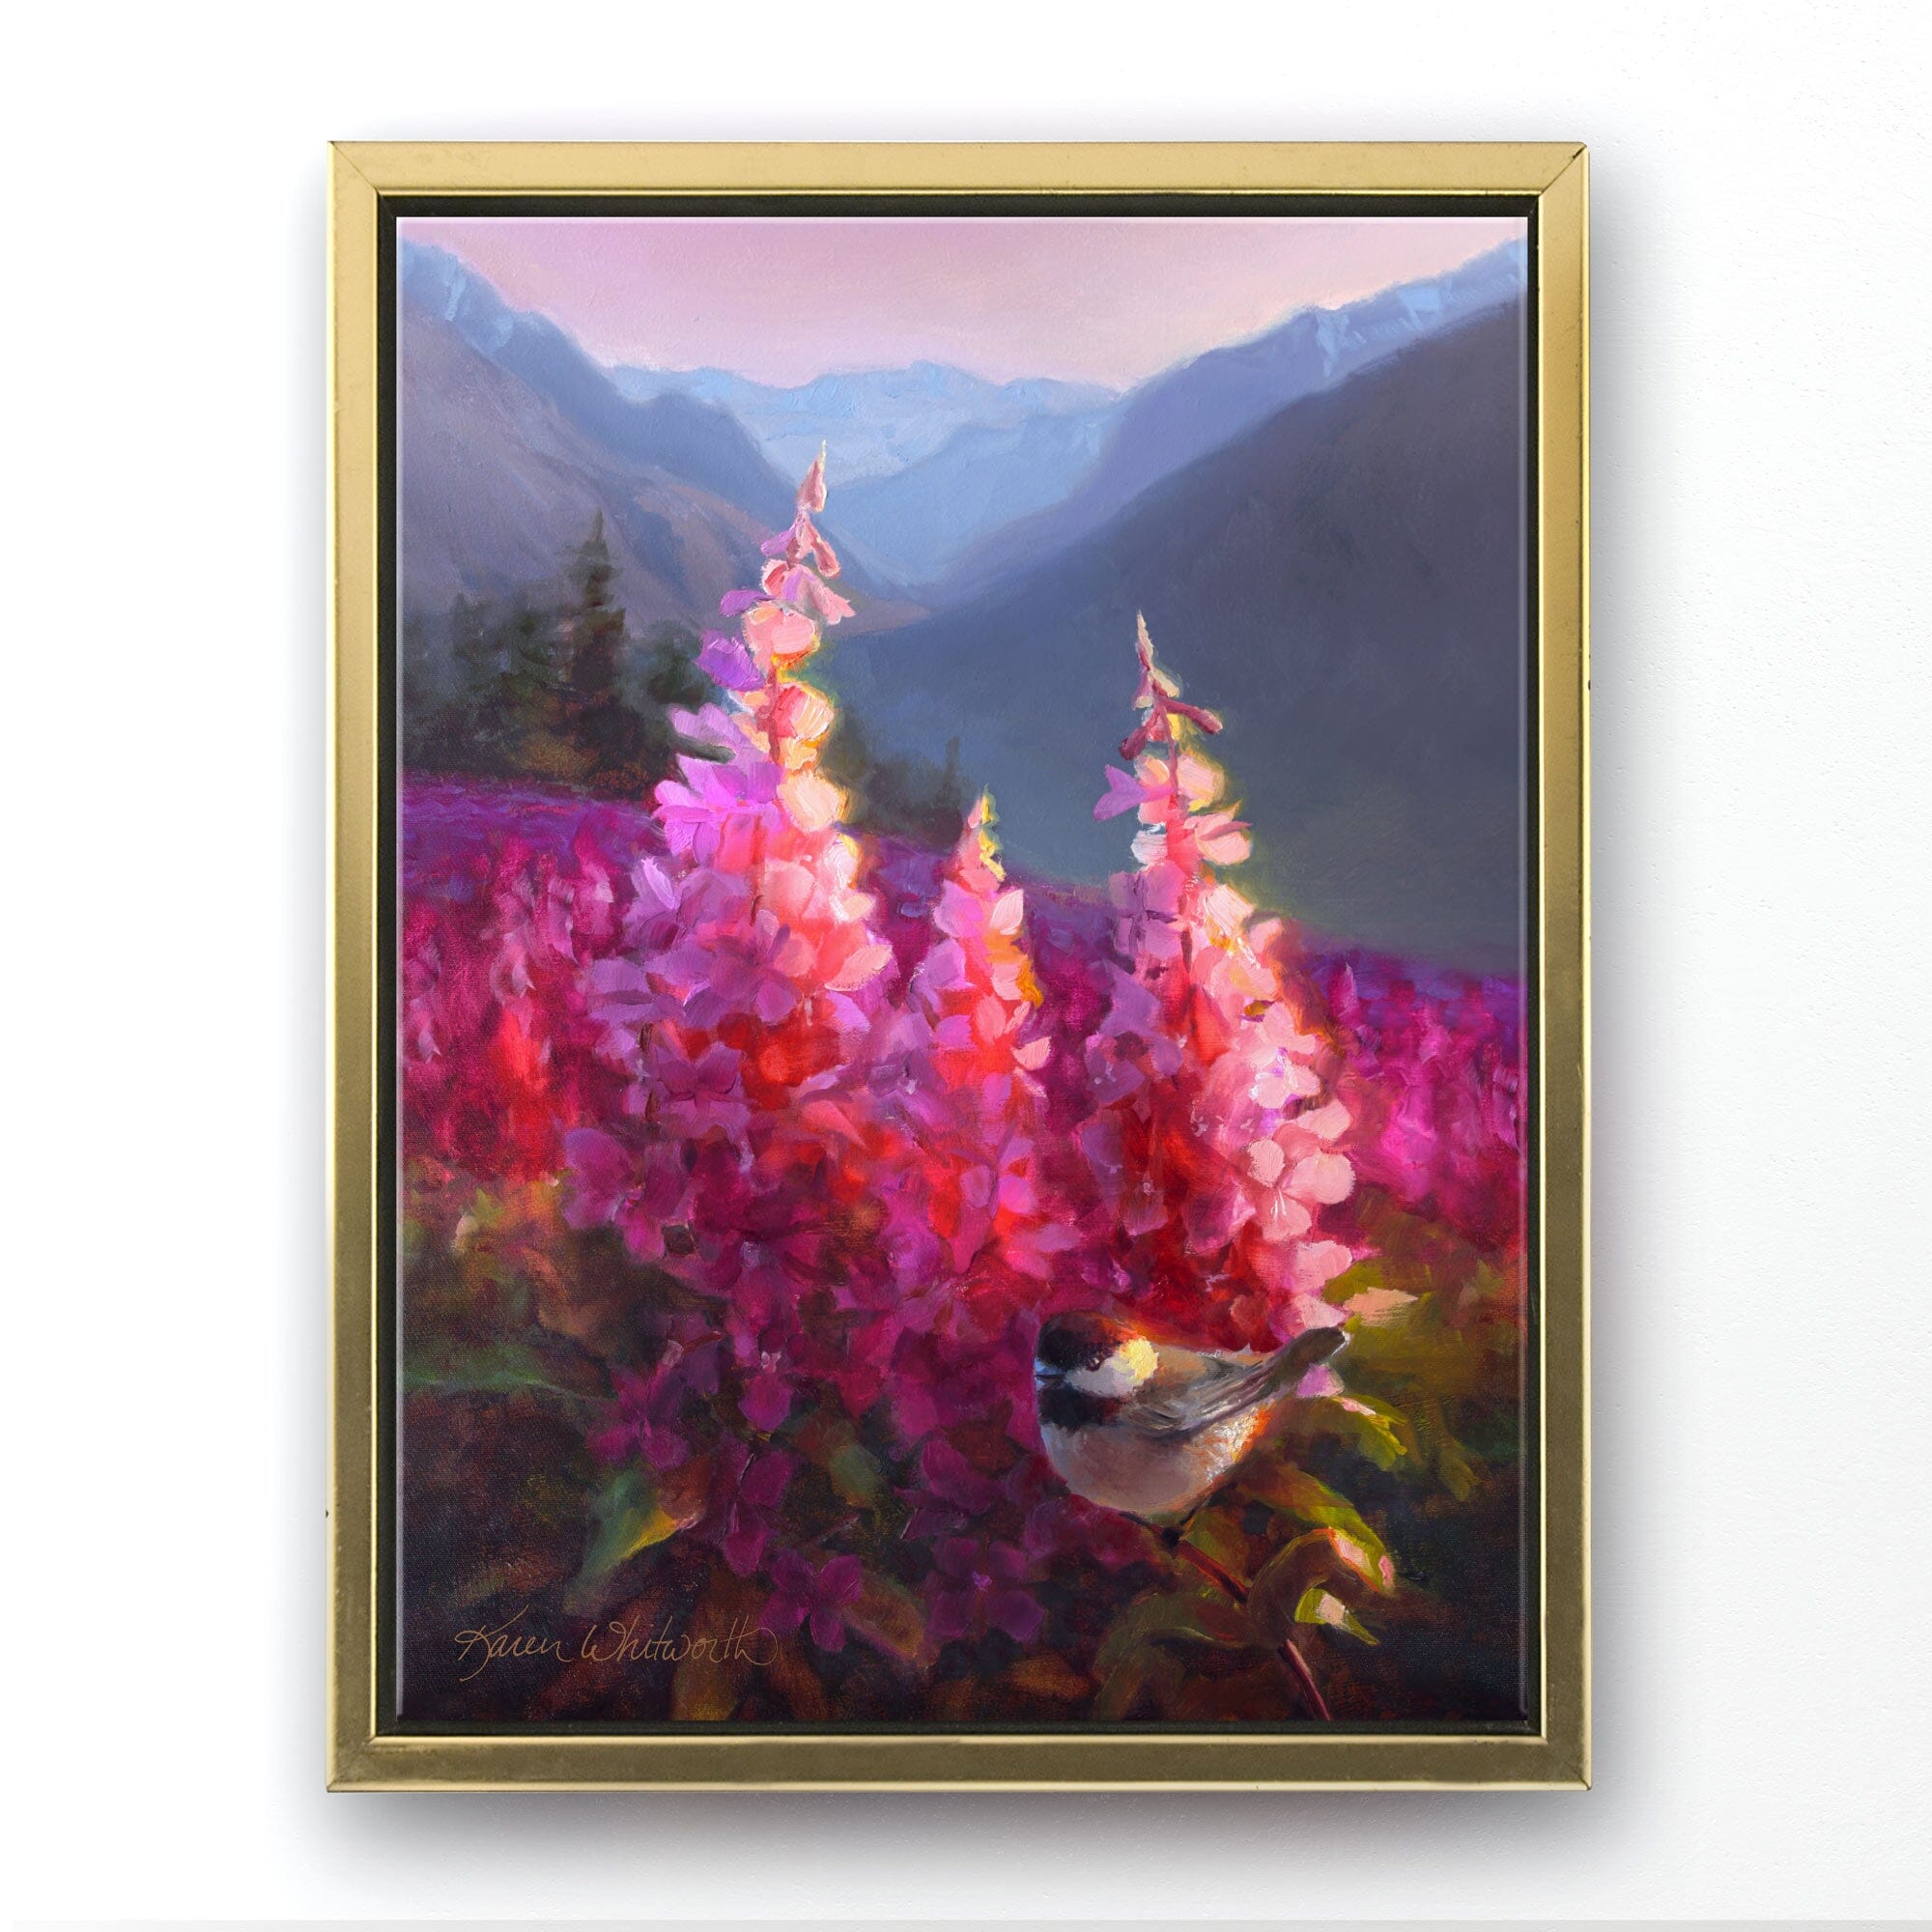 Alaska art on canvas of mountains with alpenglow on a meadow of fireweed flowers. This landscape painting is framed with a gold floater frame and is hanging on a white wall.